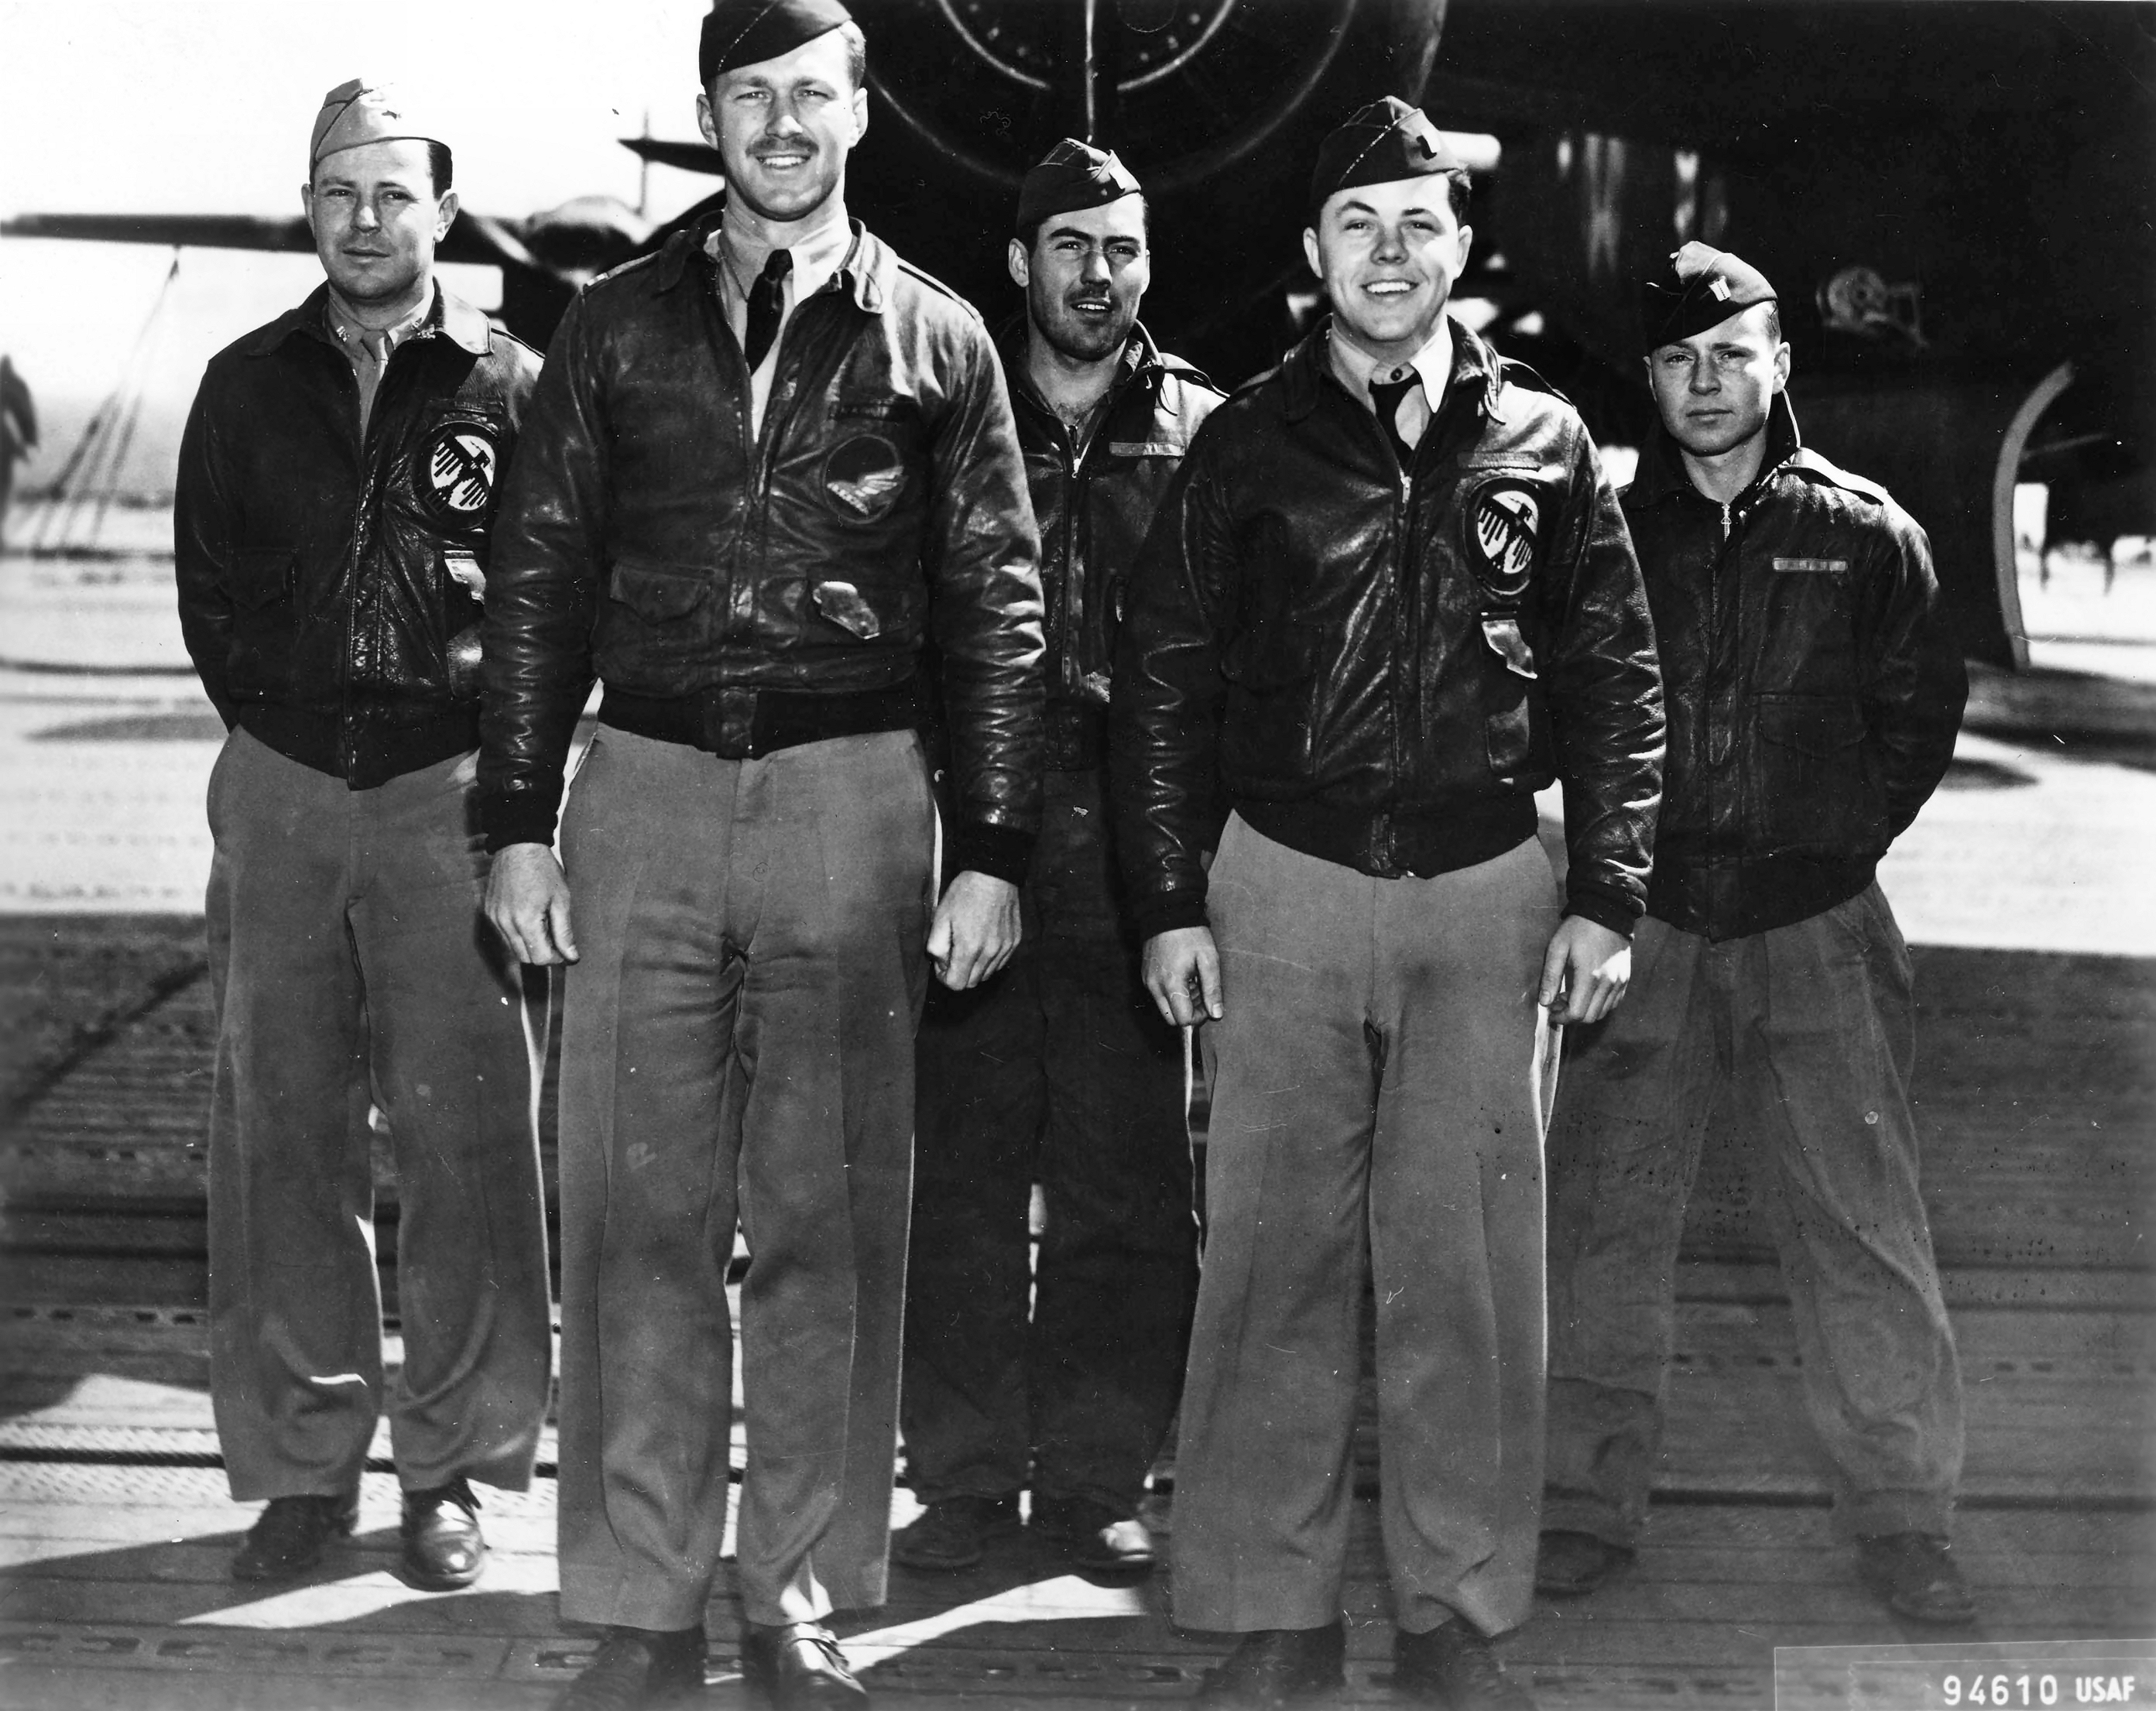 One of the Doolittle Raid B-25 bomber crews aboard USS Hornet shortly before the mission, Apr 1942